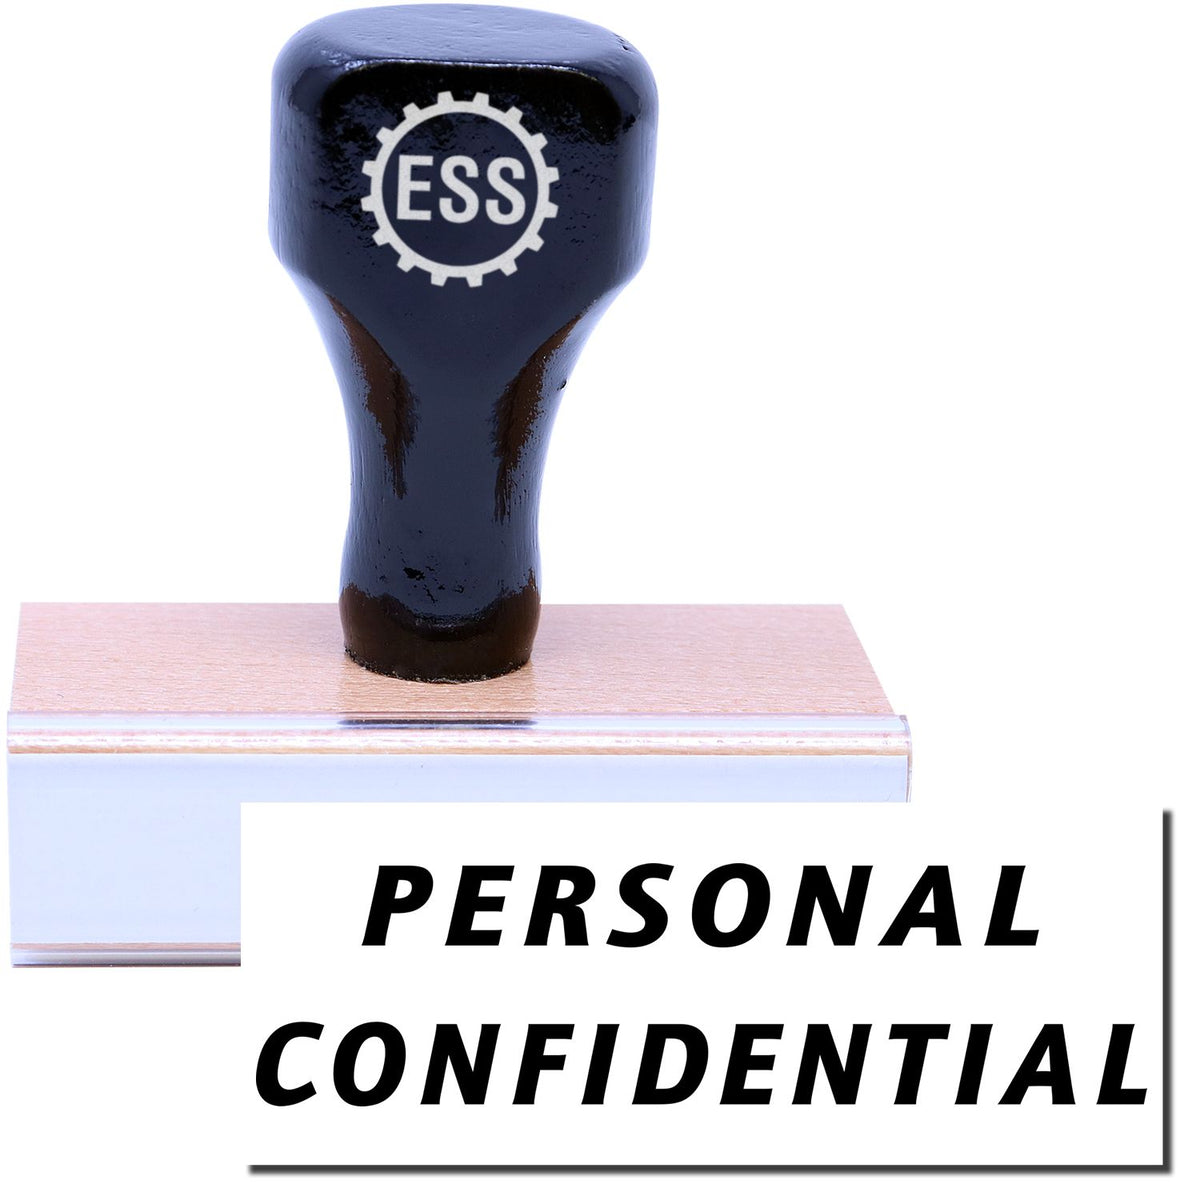 A stock office rubber stamp with a stamped image showing how the text &quot;PERSONAL CONFIDENTIAL&quot; in a large italic font is displayed after stamping.